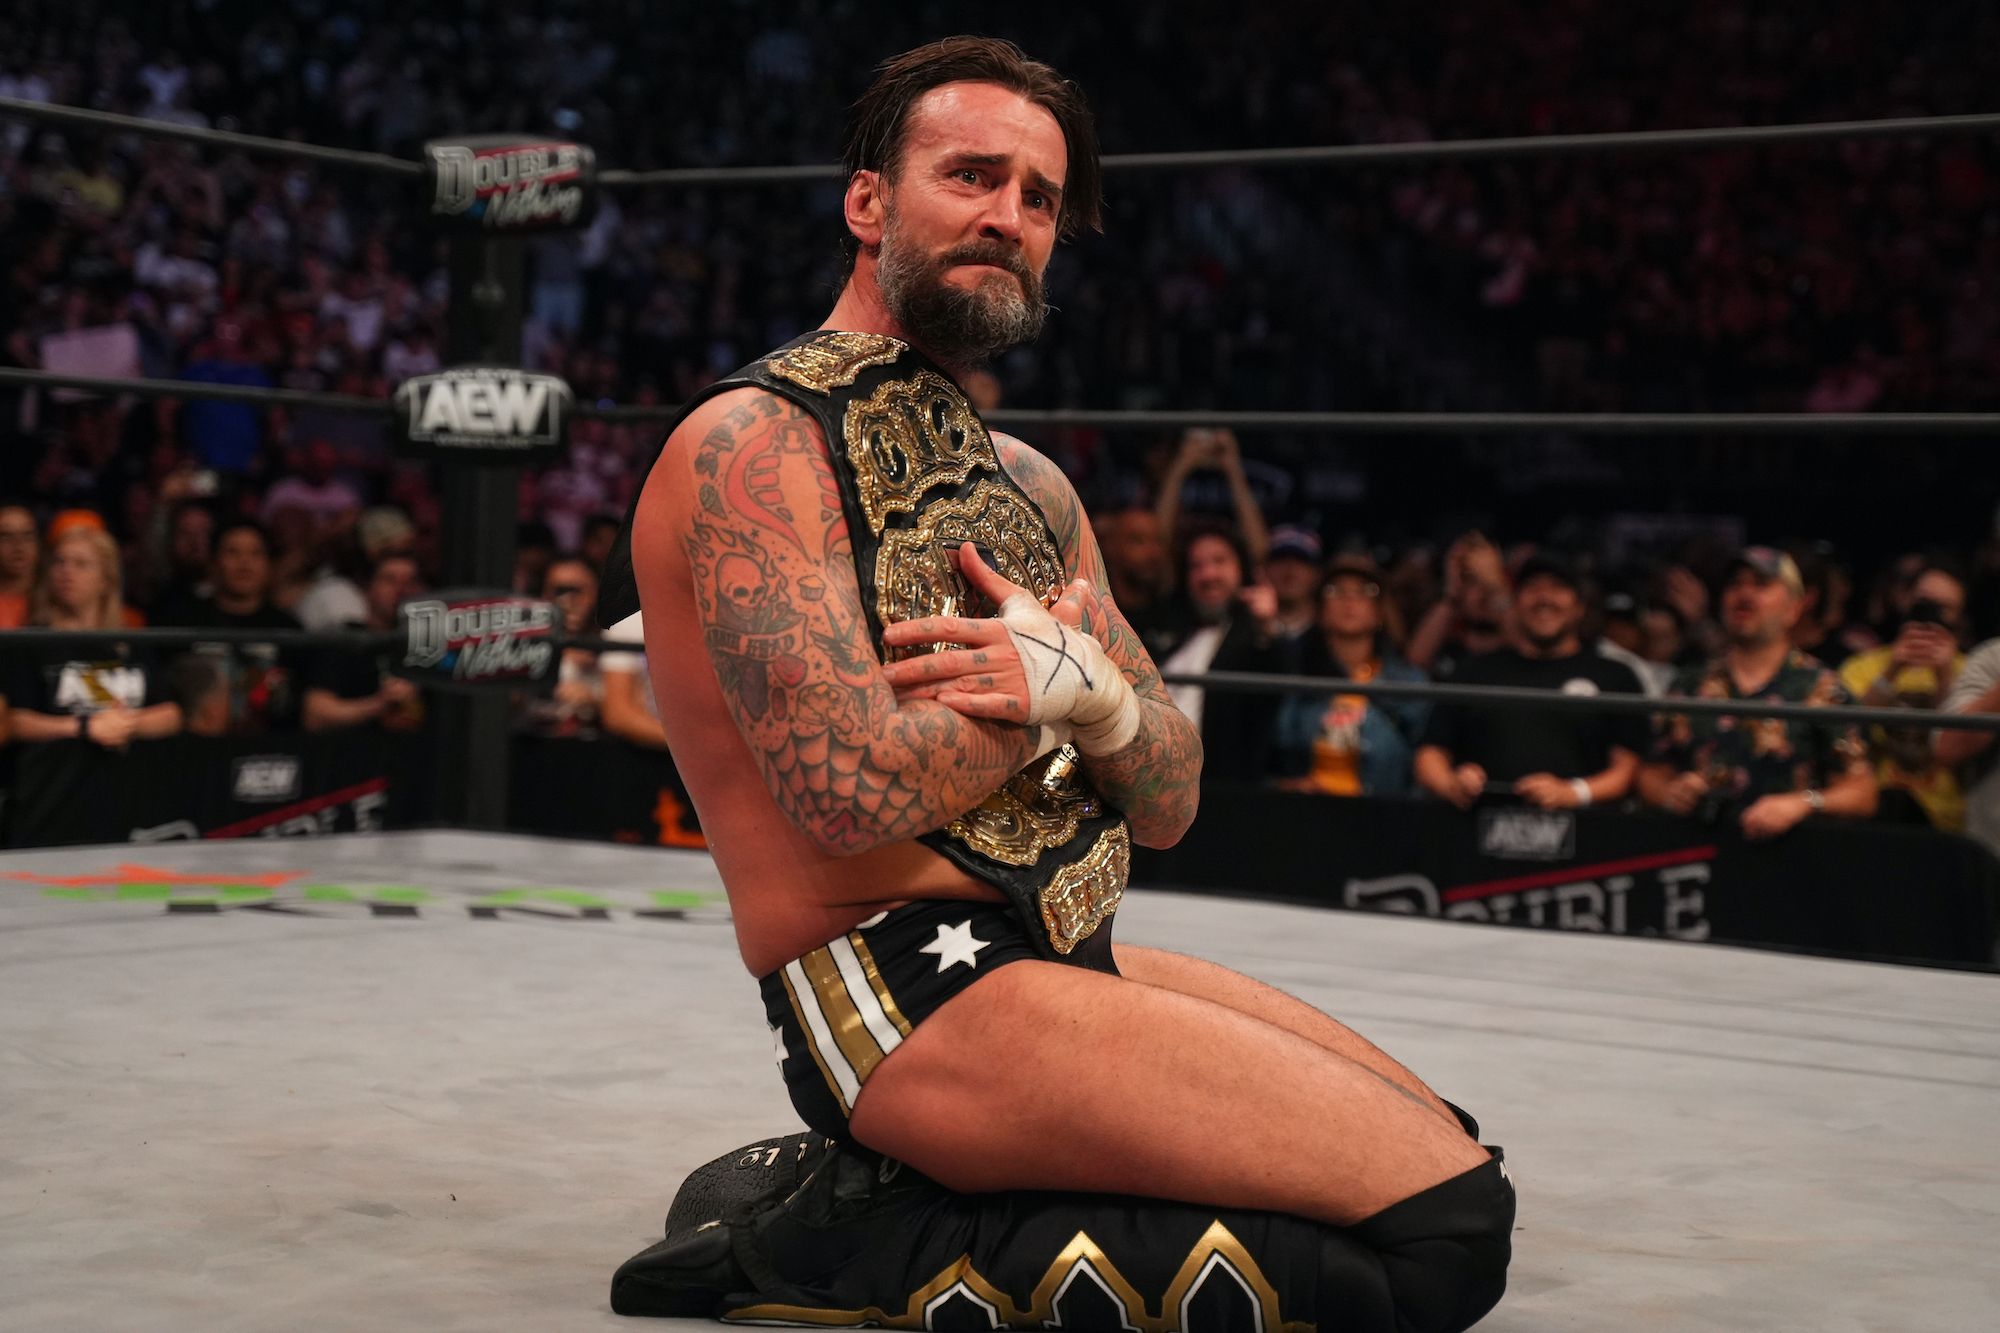 CM Punk attends Impact Wrestling show to support Trinity